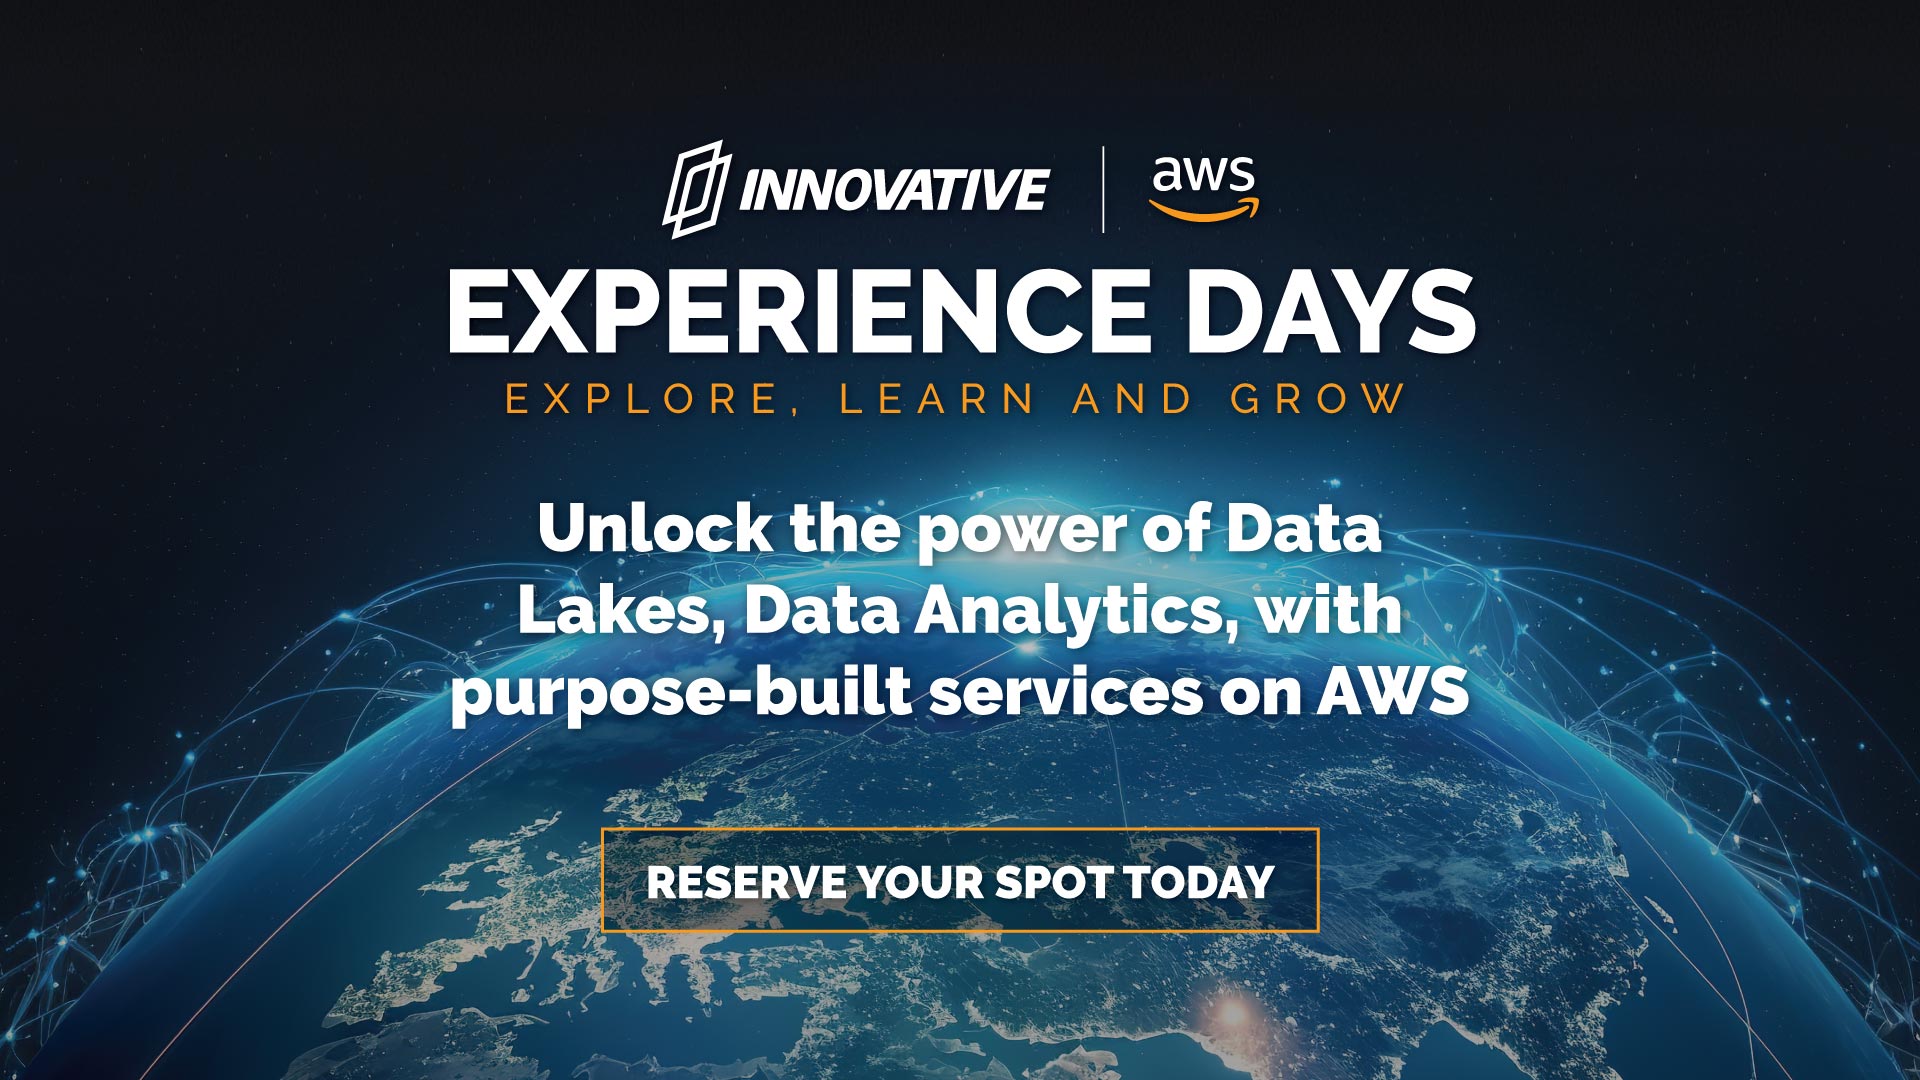 Unlock the power of Data Lakes, Data Analytics, with purpose-built services on AWS